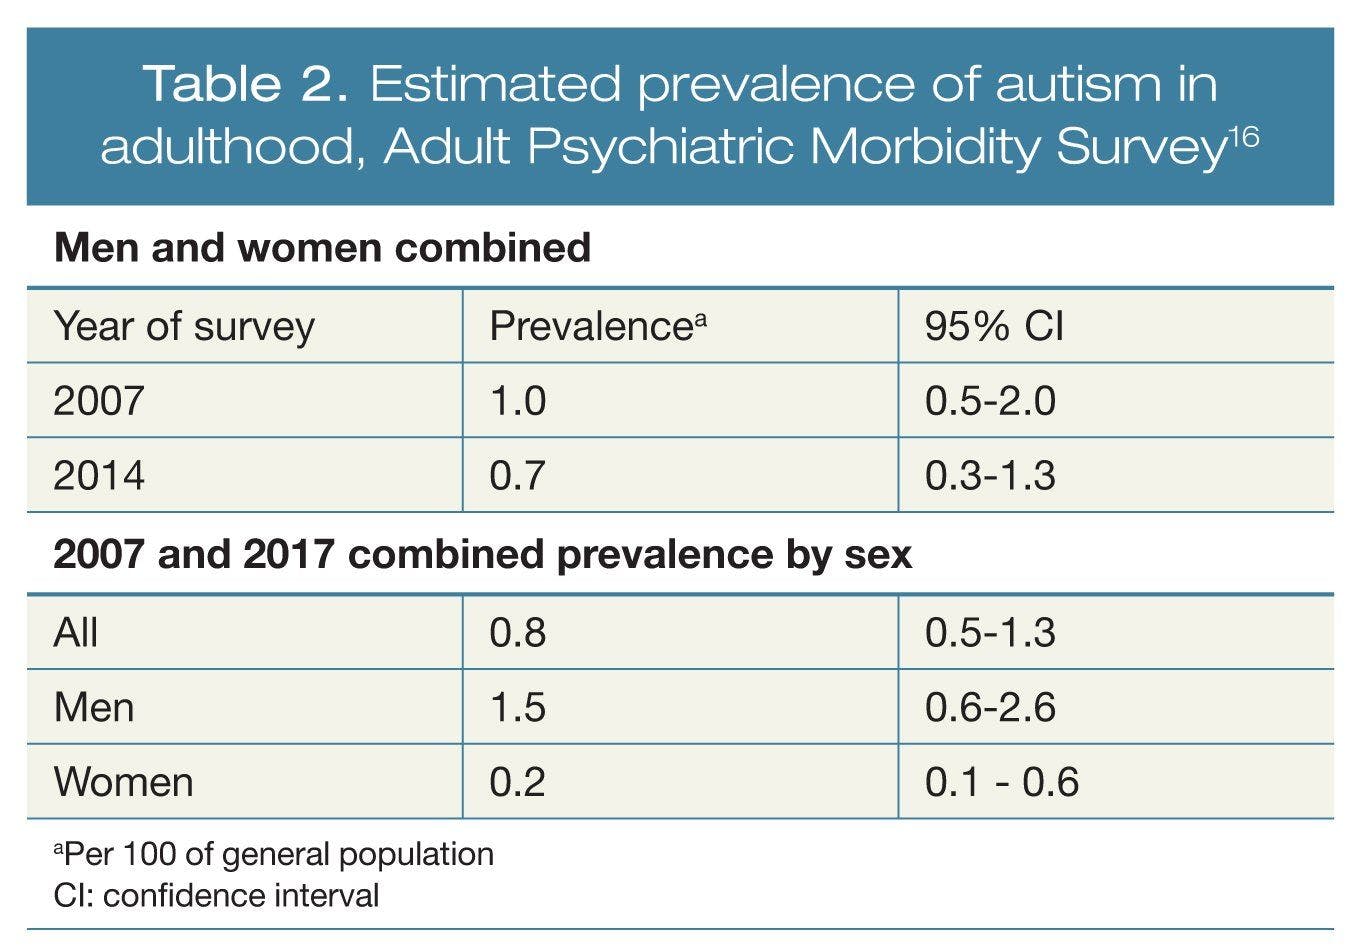 Estimated prevalence of autism in adulthood, Adult Psychiatric Morbidity Survey16